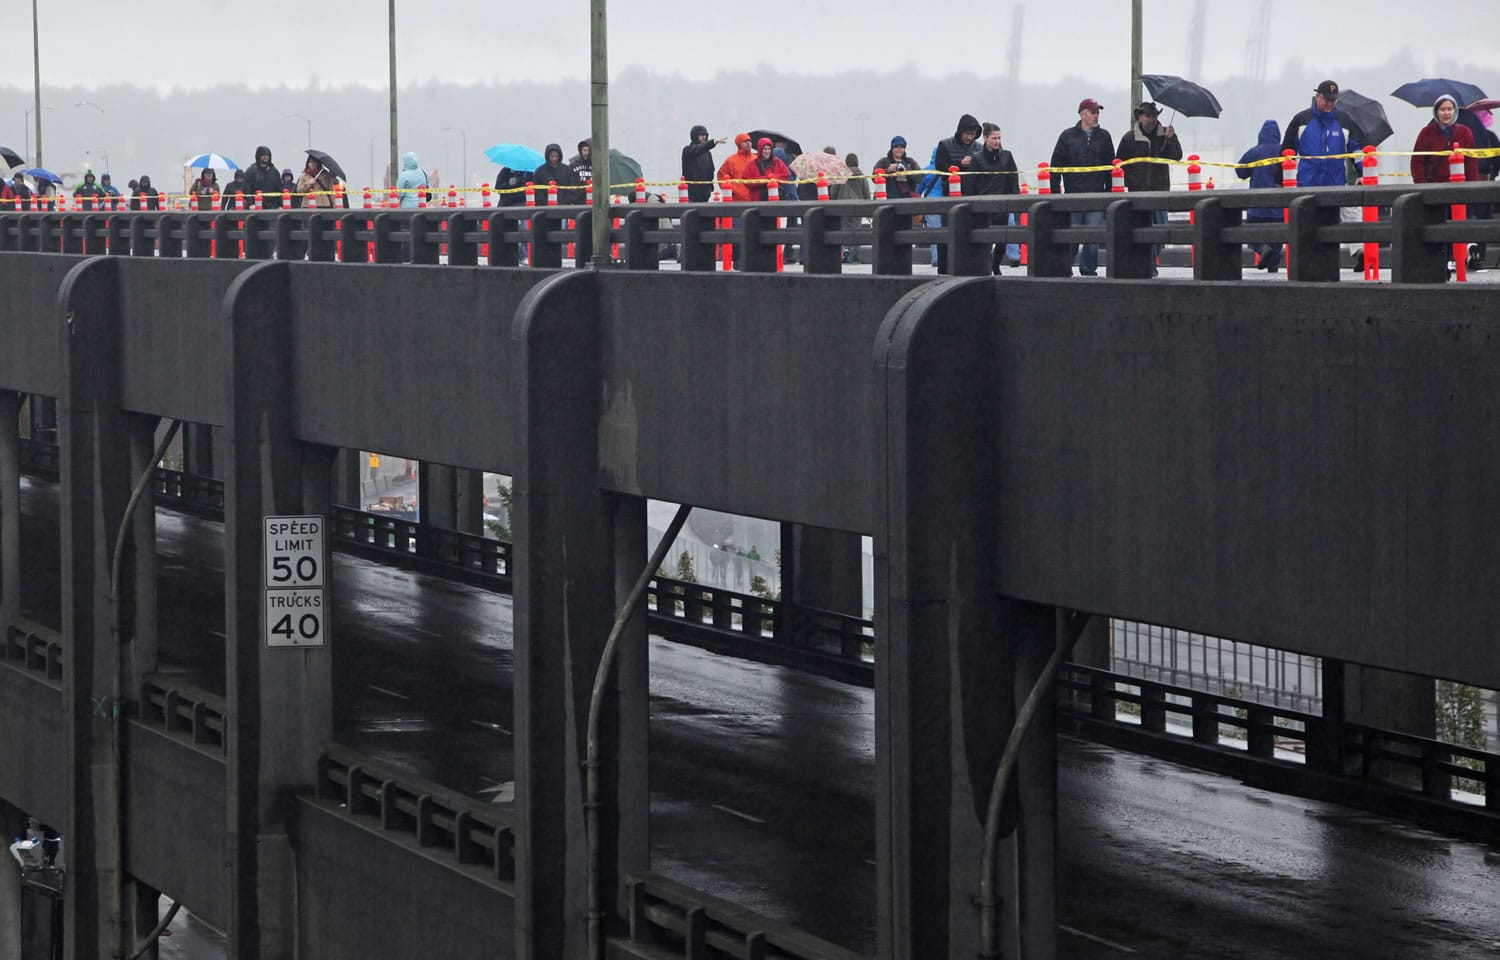 The public walks on the top deck of the Alaskan Way Viaduct near the stadiums Saturday morning in the rain.  They were able to to watch as crews demolished a section of the viaduct and also enjoy great views of the city from the structure that helped shape Seattle's waterfront.